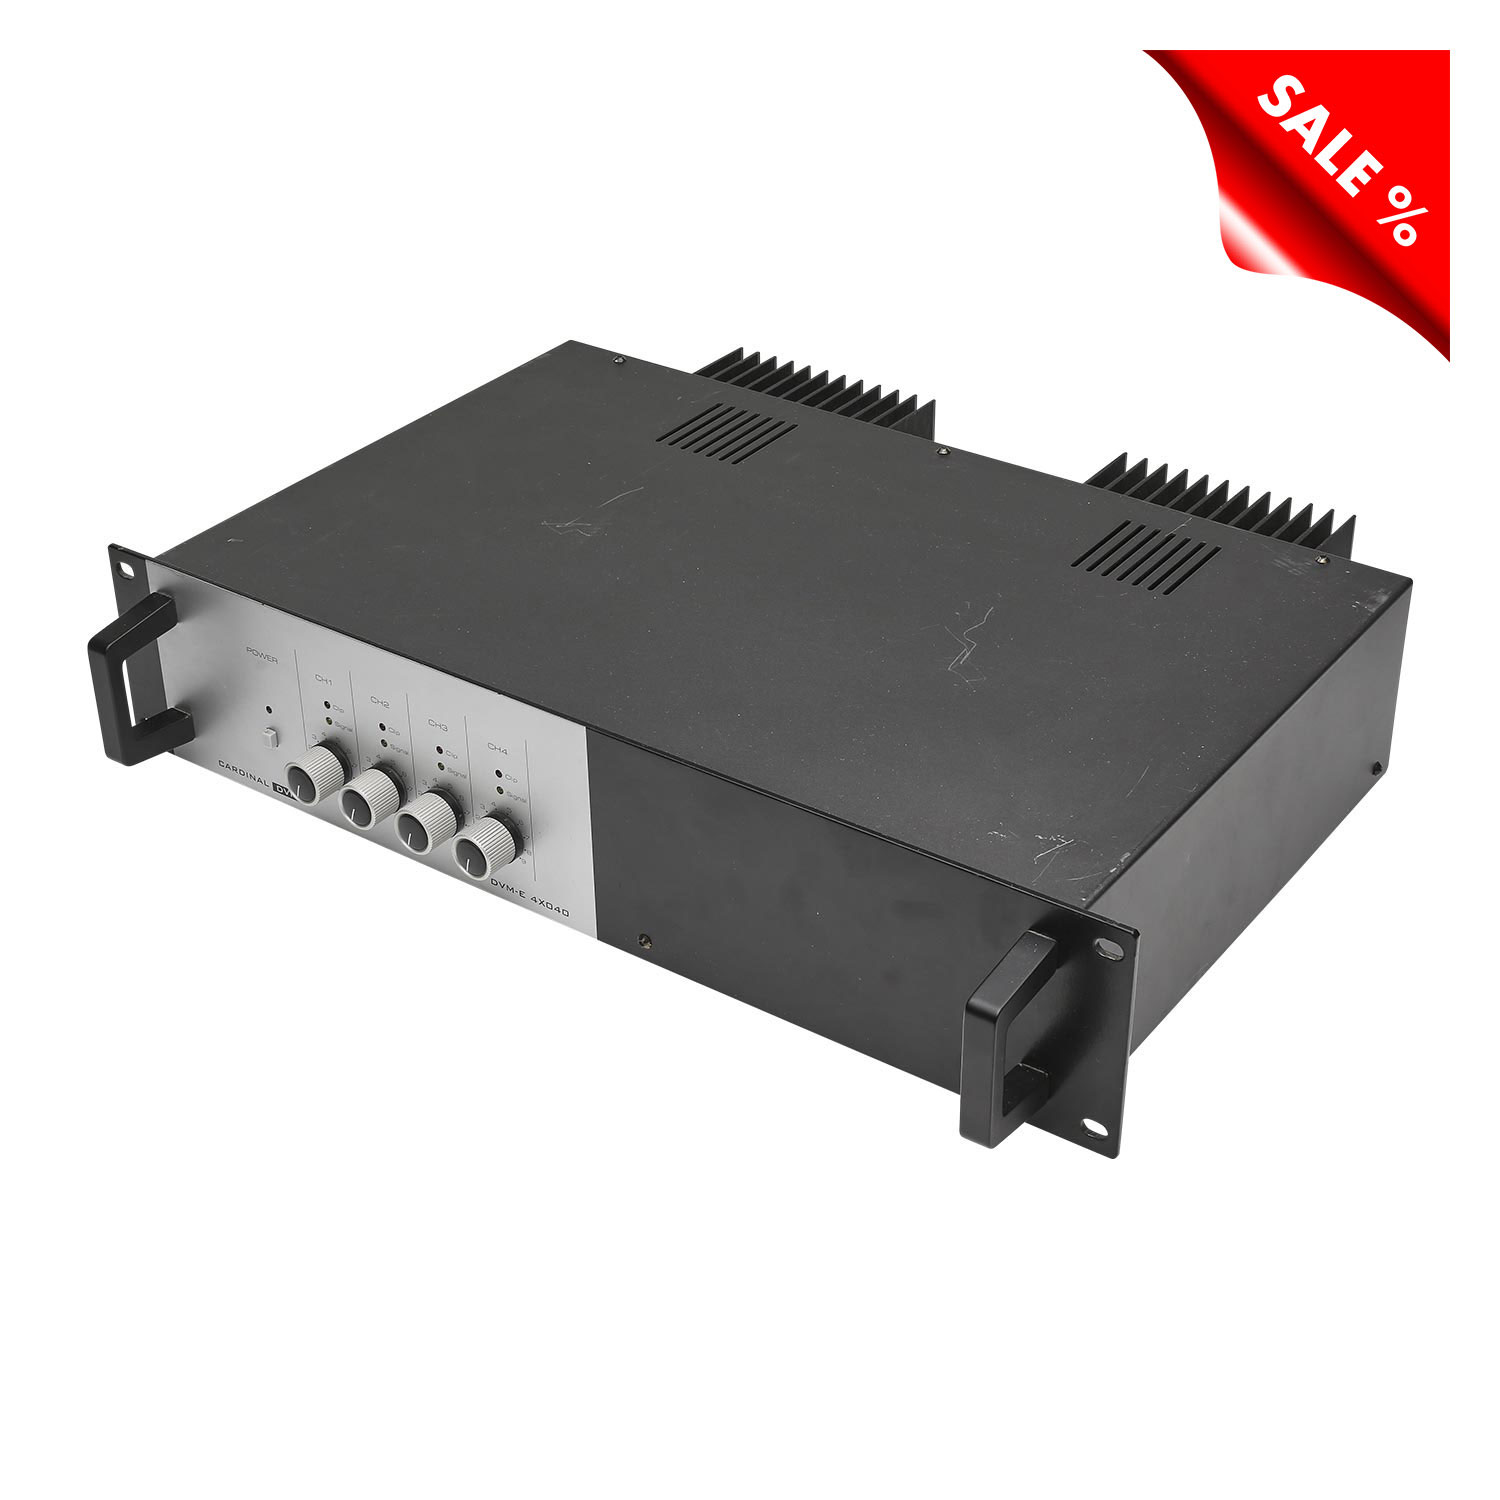 CARDINAL DVM ELA-amplifier 4 x 40 W, amplifier, IN: 2 x RCA per channel | OUT: LS-clamps up to 4 mm², 2 HE, W x H x D: 483 mm x 92 mm x 290 mm